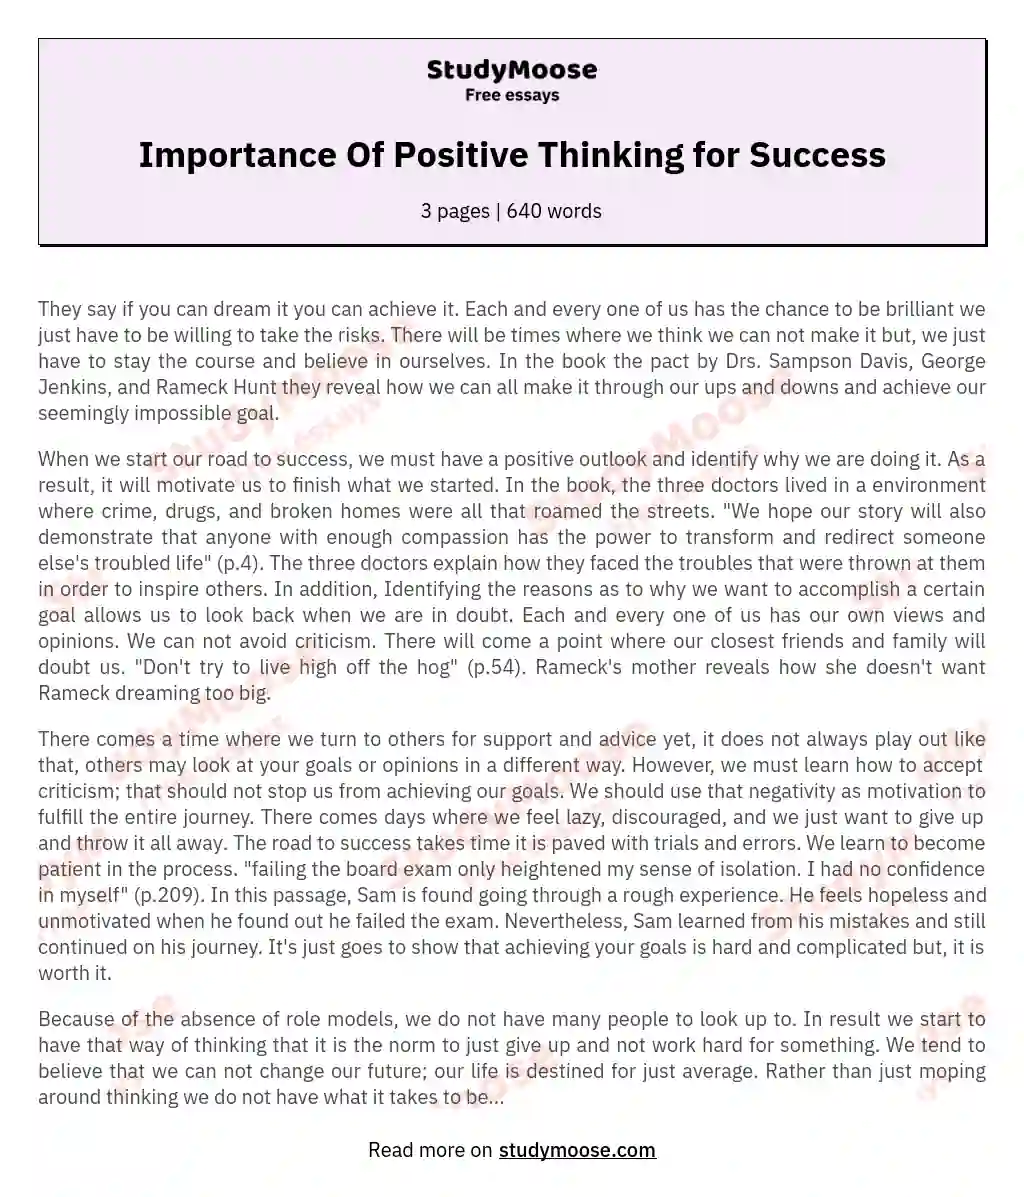 essay on positive aspects of your personality